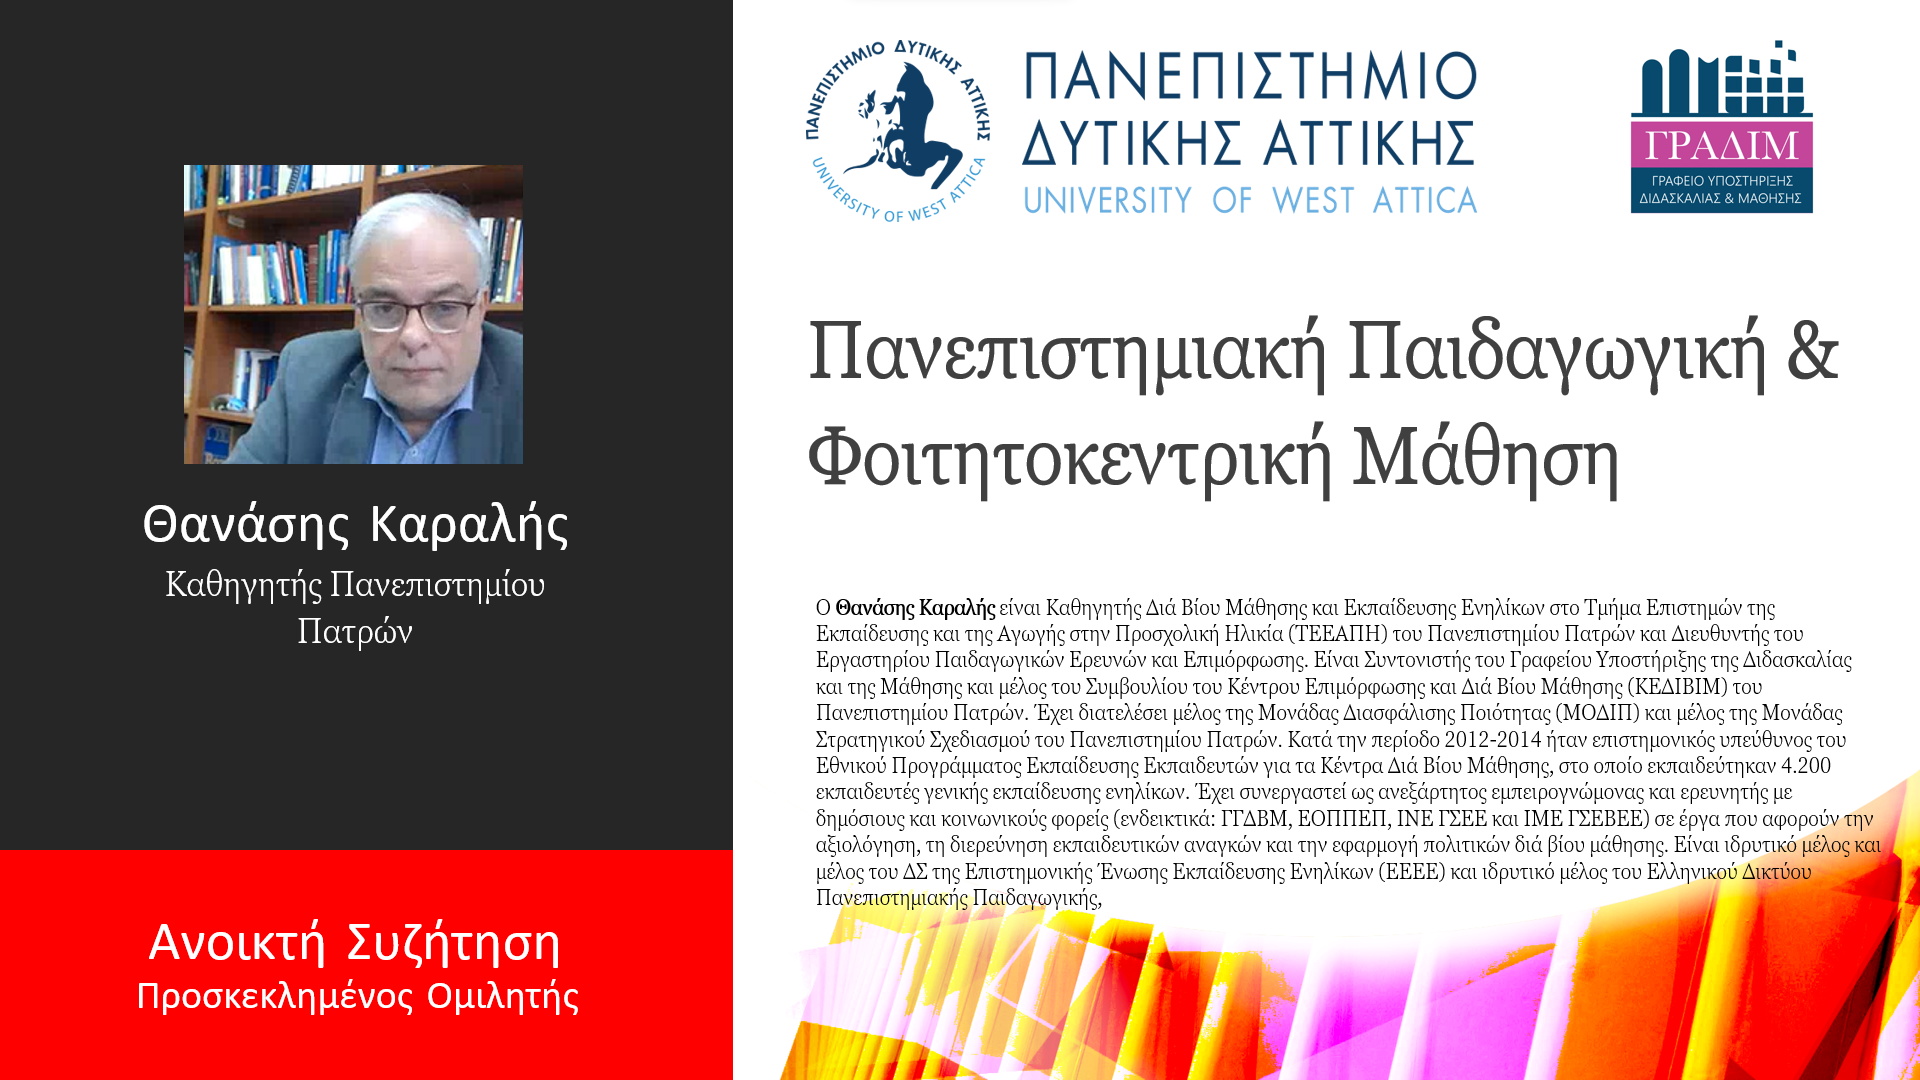 Meeting -open discussion of CTL of the University of West Attica